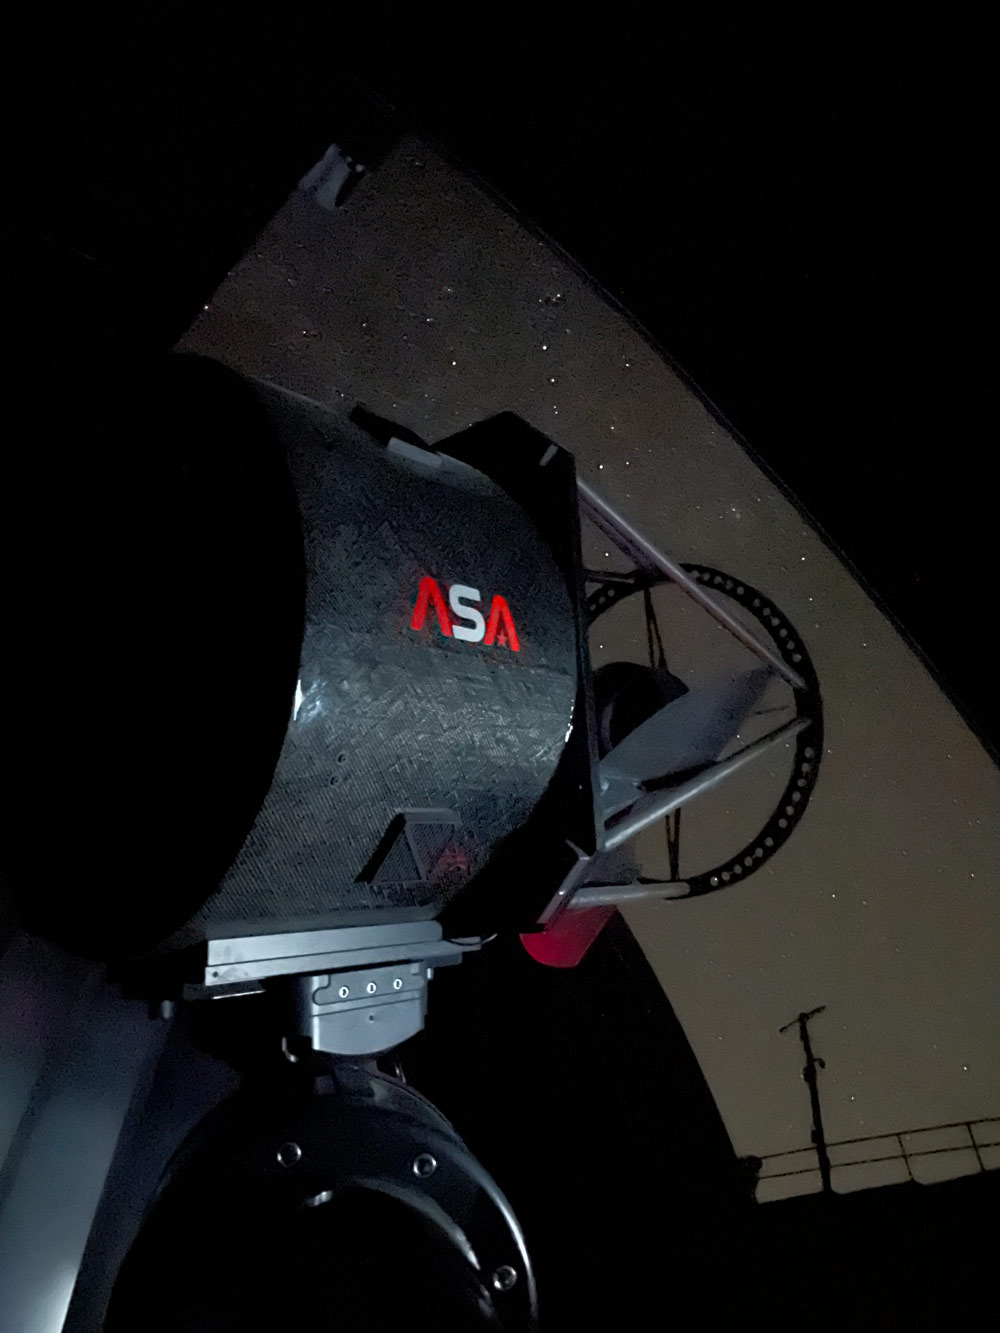 ASA800 the high end telescope for Israel